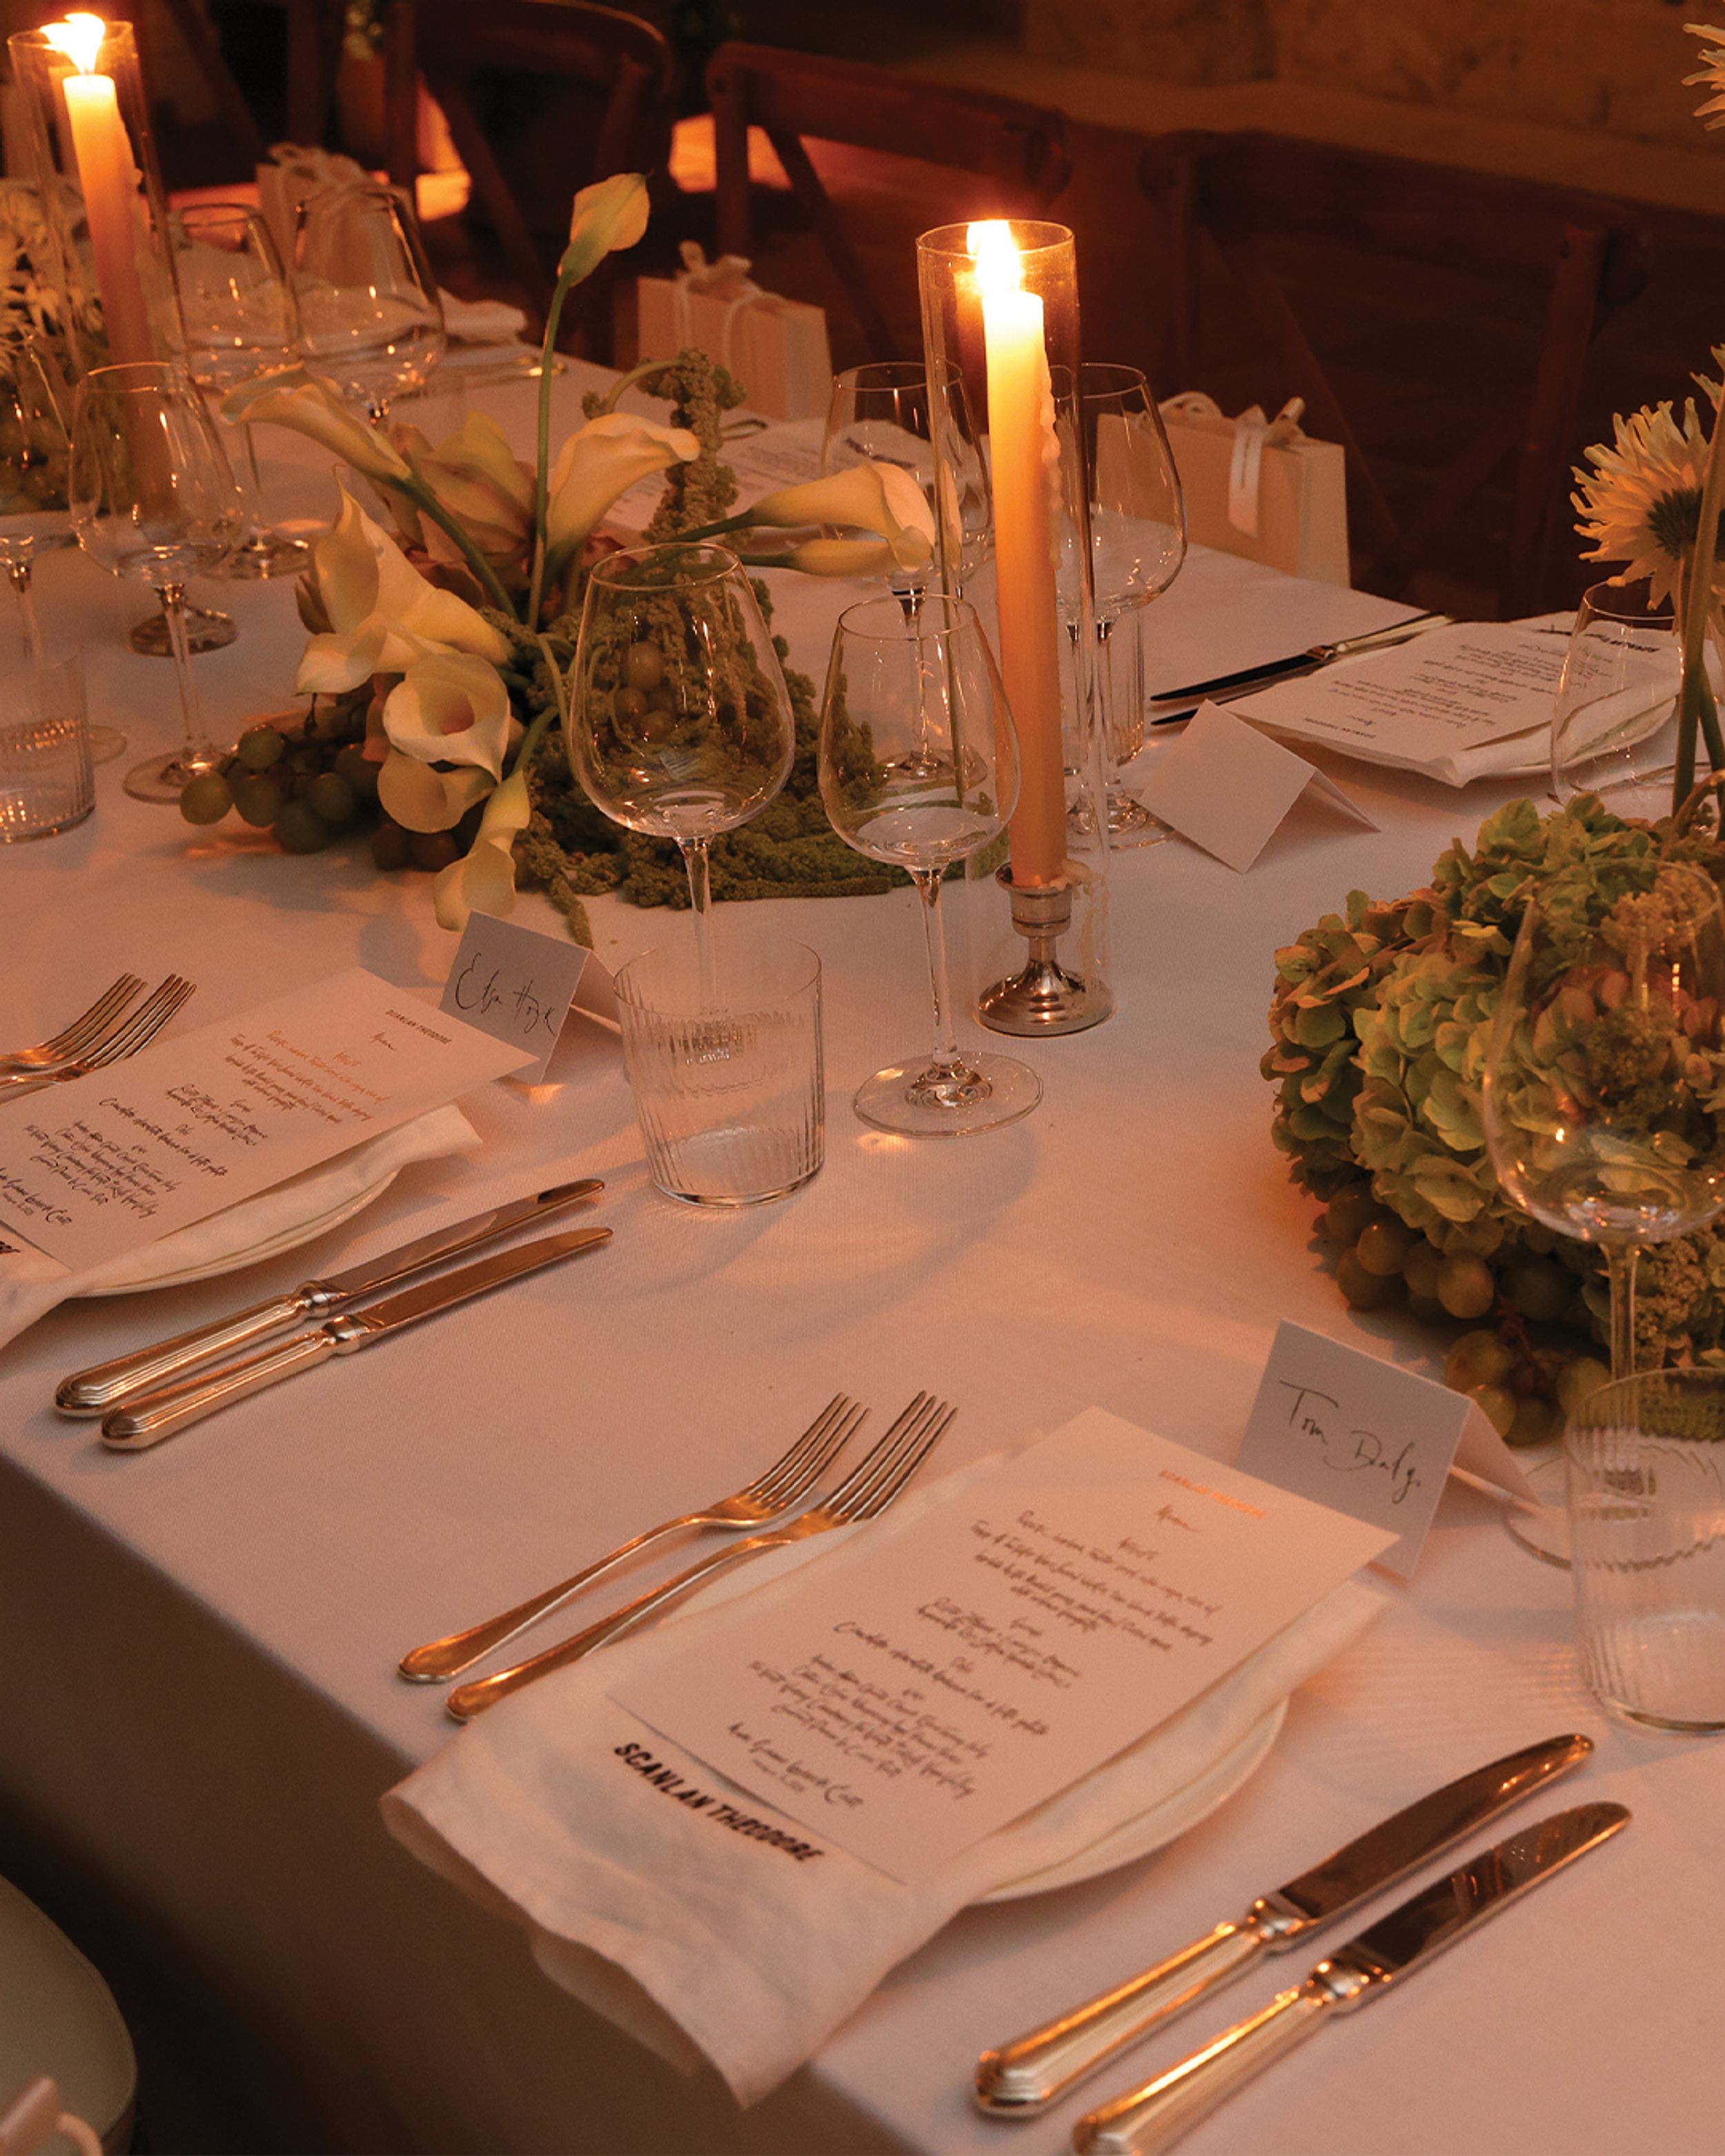 Table setting with various floral arrangements and candles